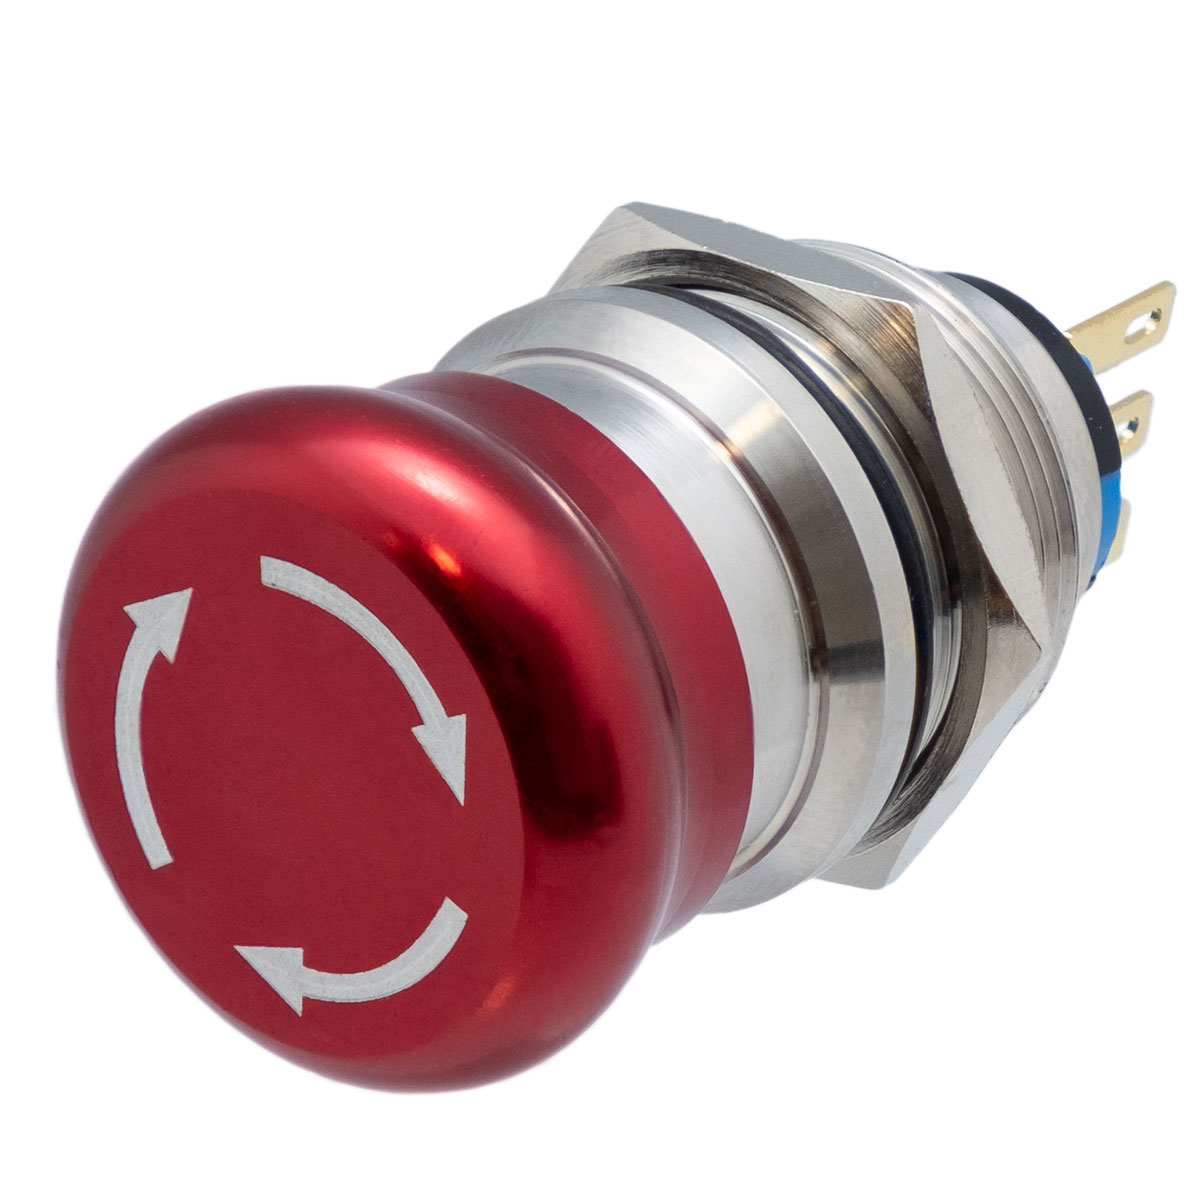 Emergency switch 28mm, stainless steel 22mm SPDT